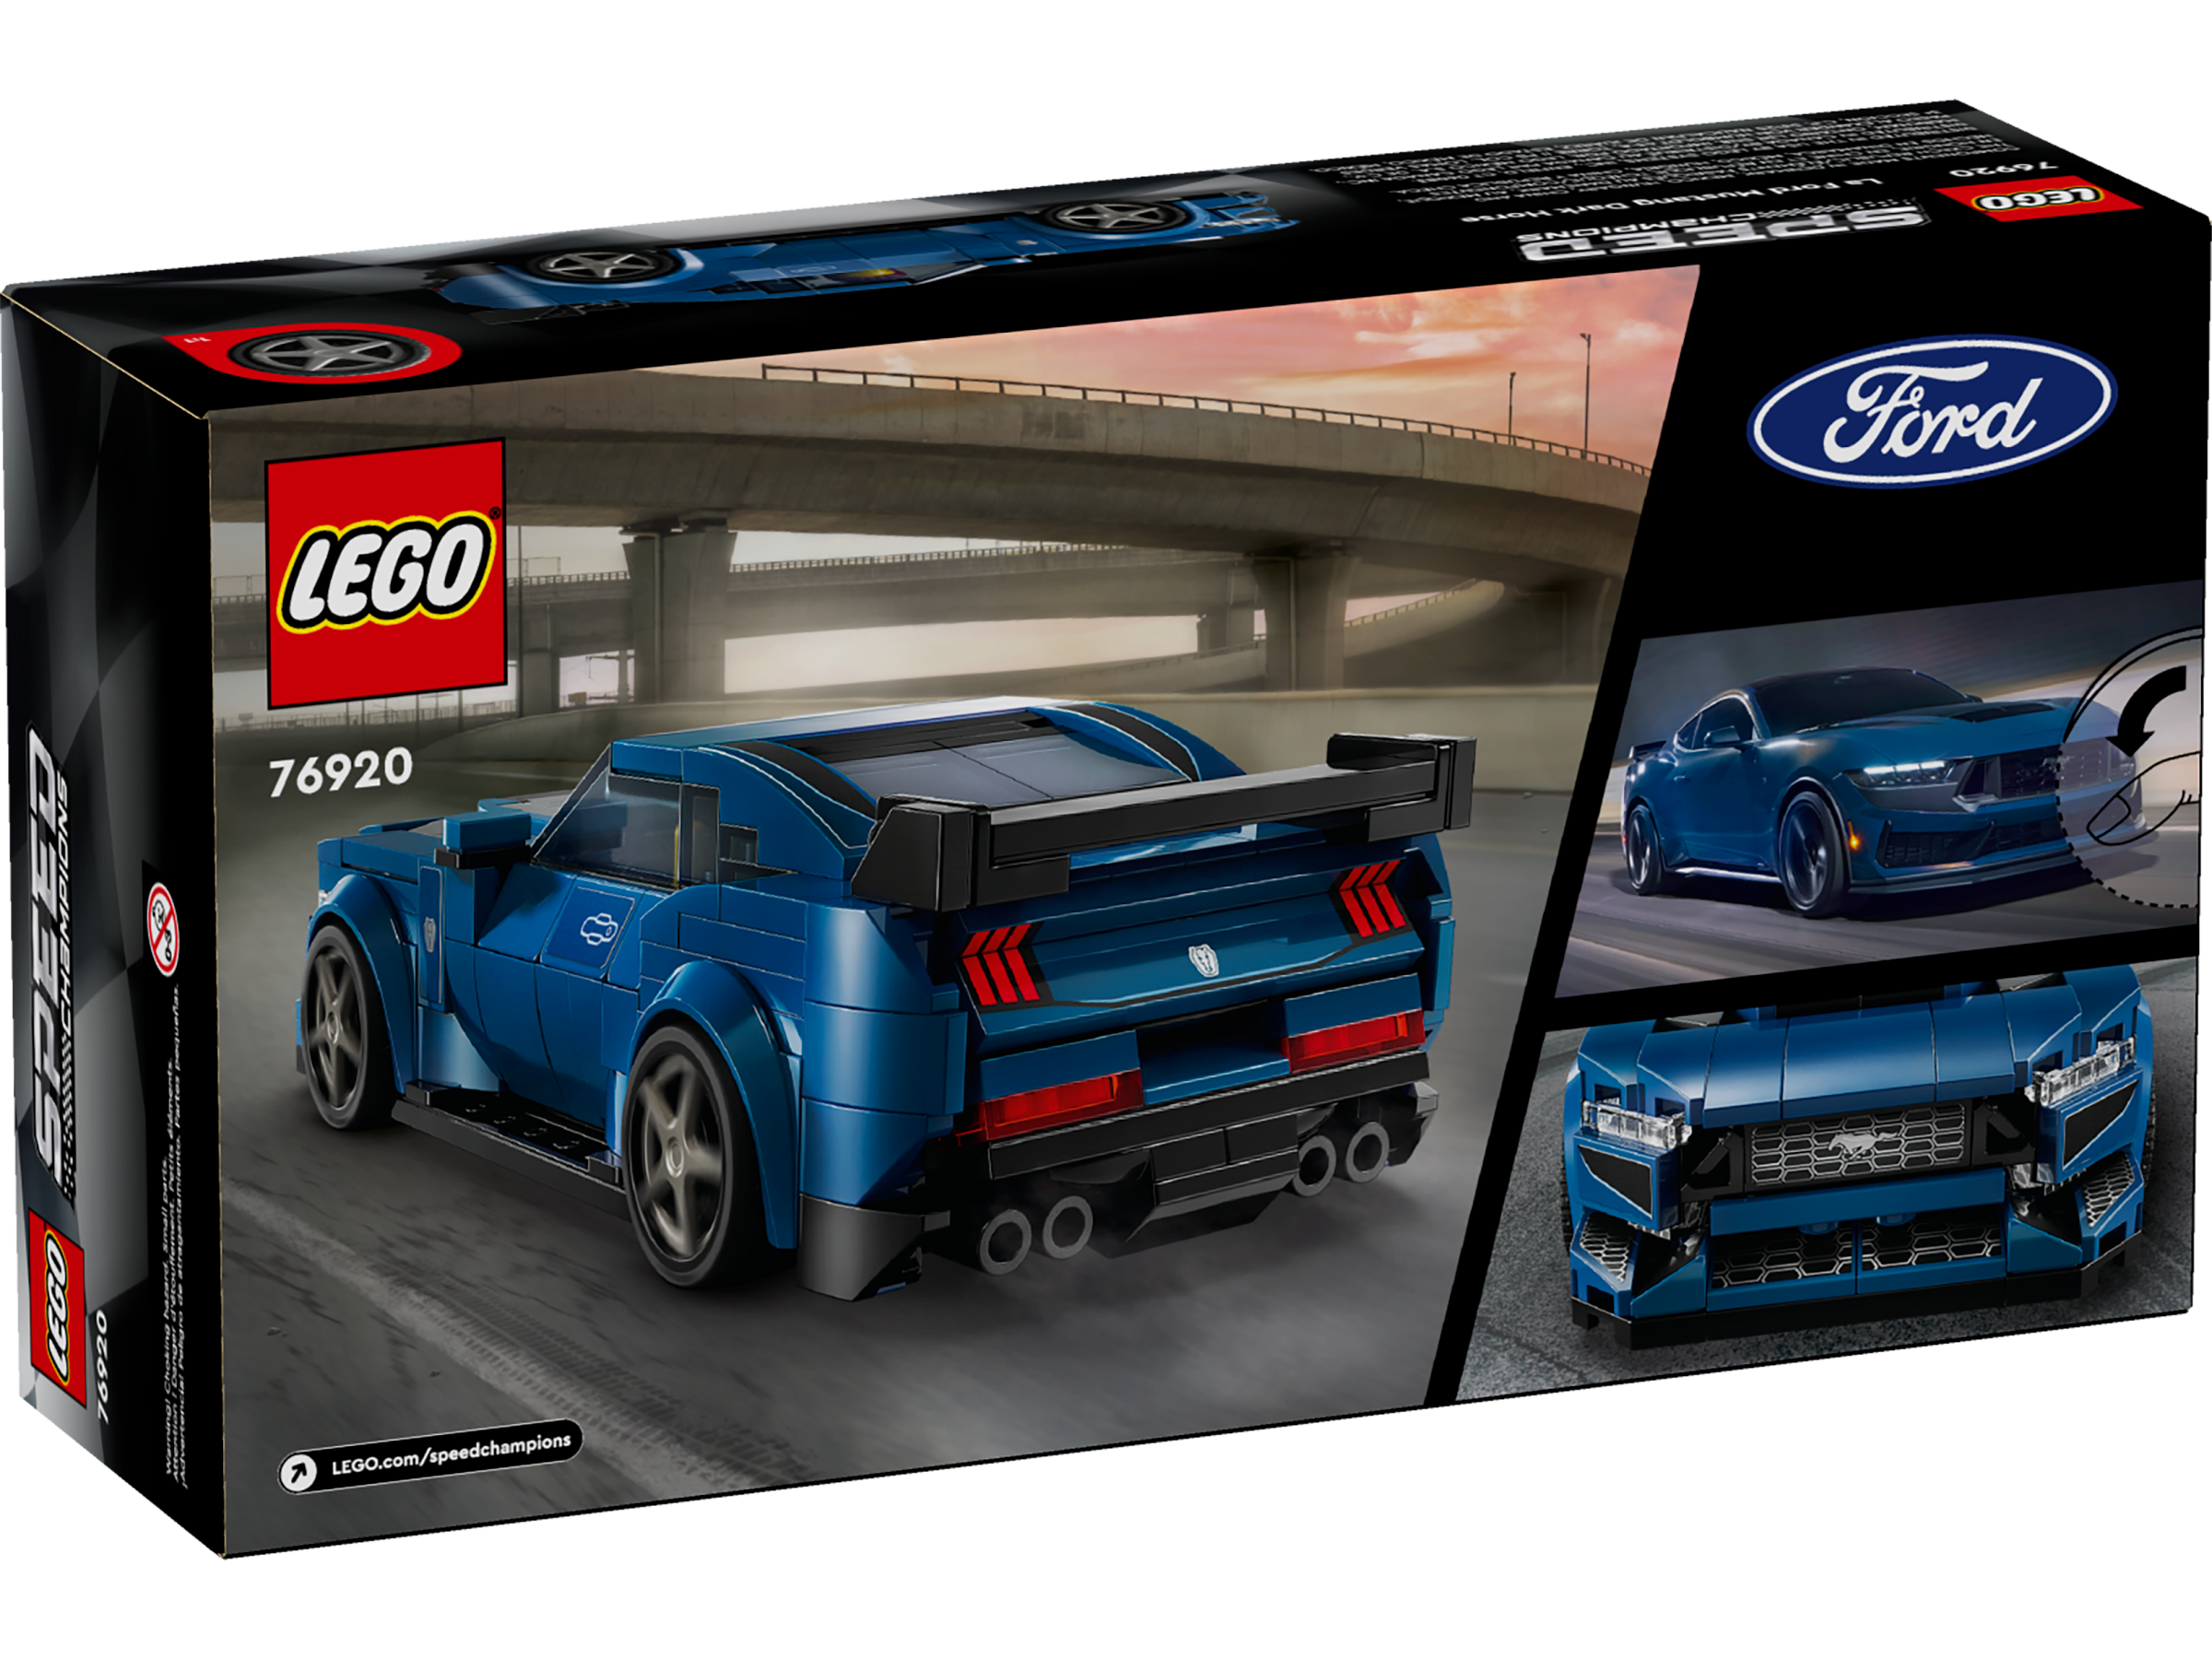 Lego Speed Champions Mustang Dark Horse And Audi S1 E-Tron Leaked